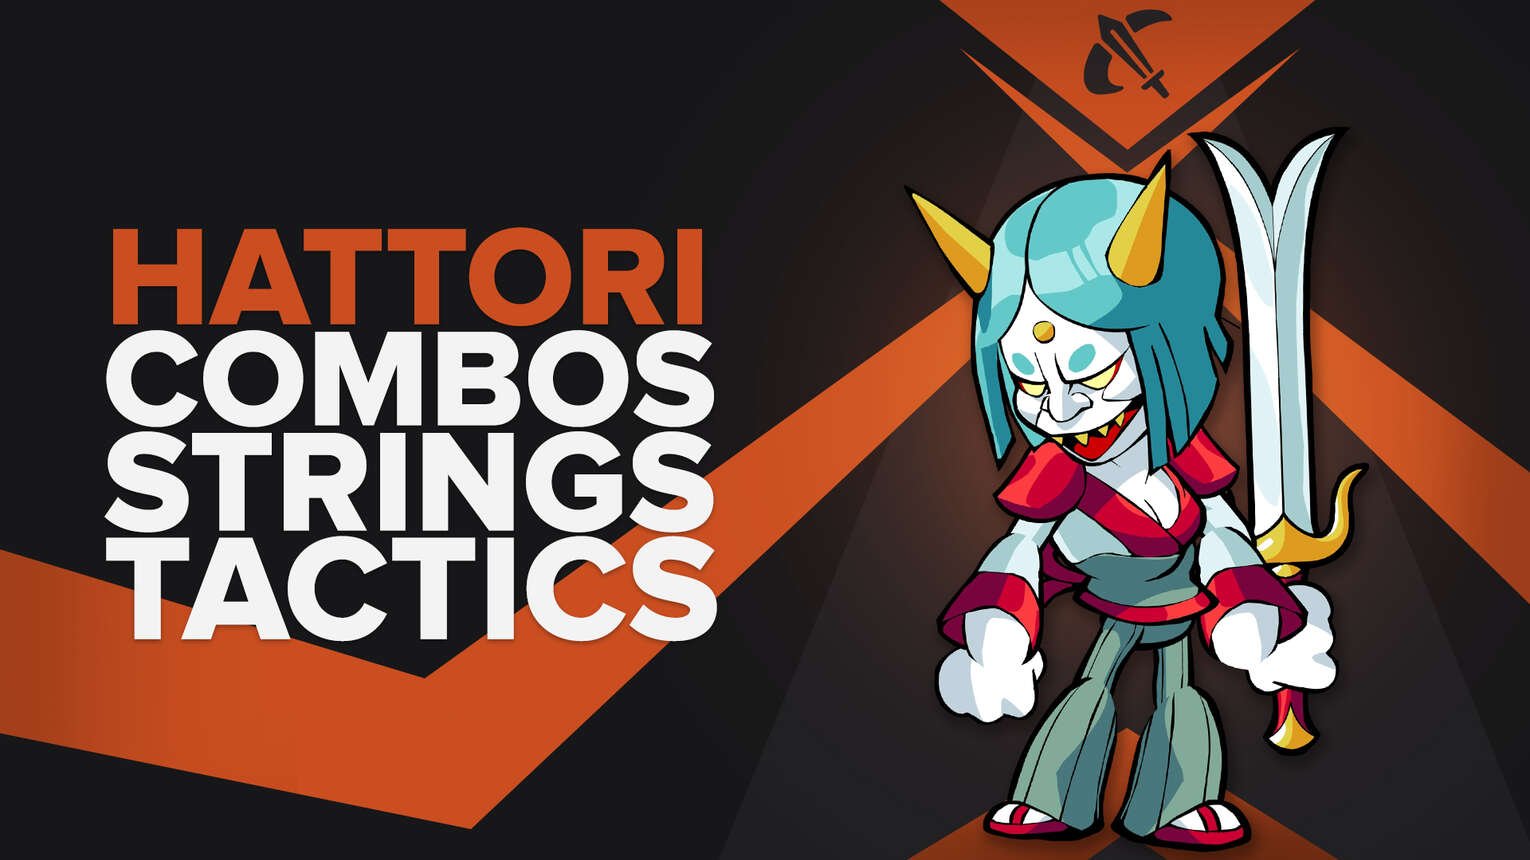 Best Hattori combos, strings and tips in Brawlhalla